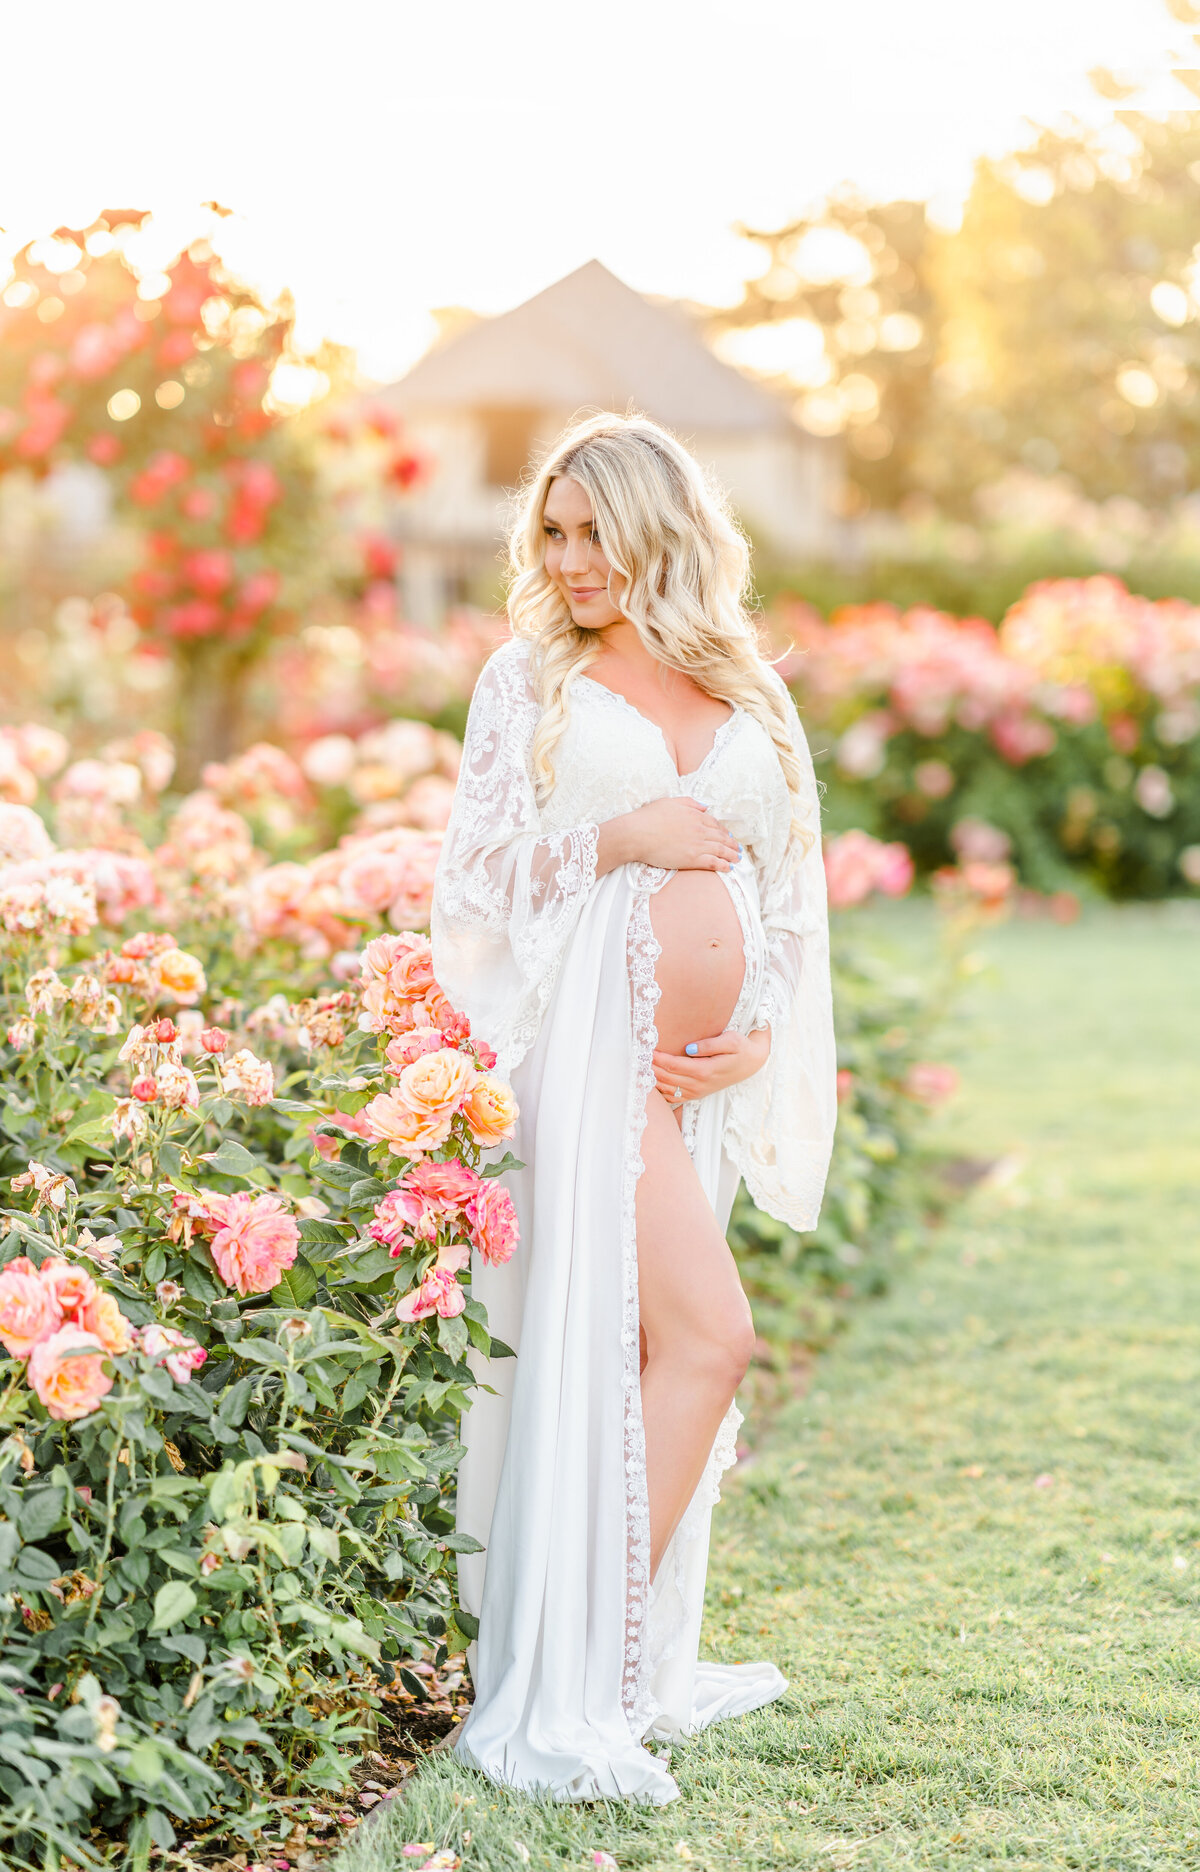 An expecting mother stands in a rose garden wearing a white gown holding and looking down at her beautiful baby bump photographed by Bay area photographer, Light Livin Photography.